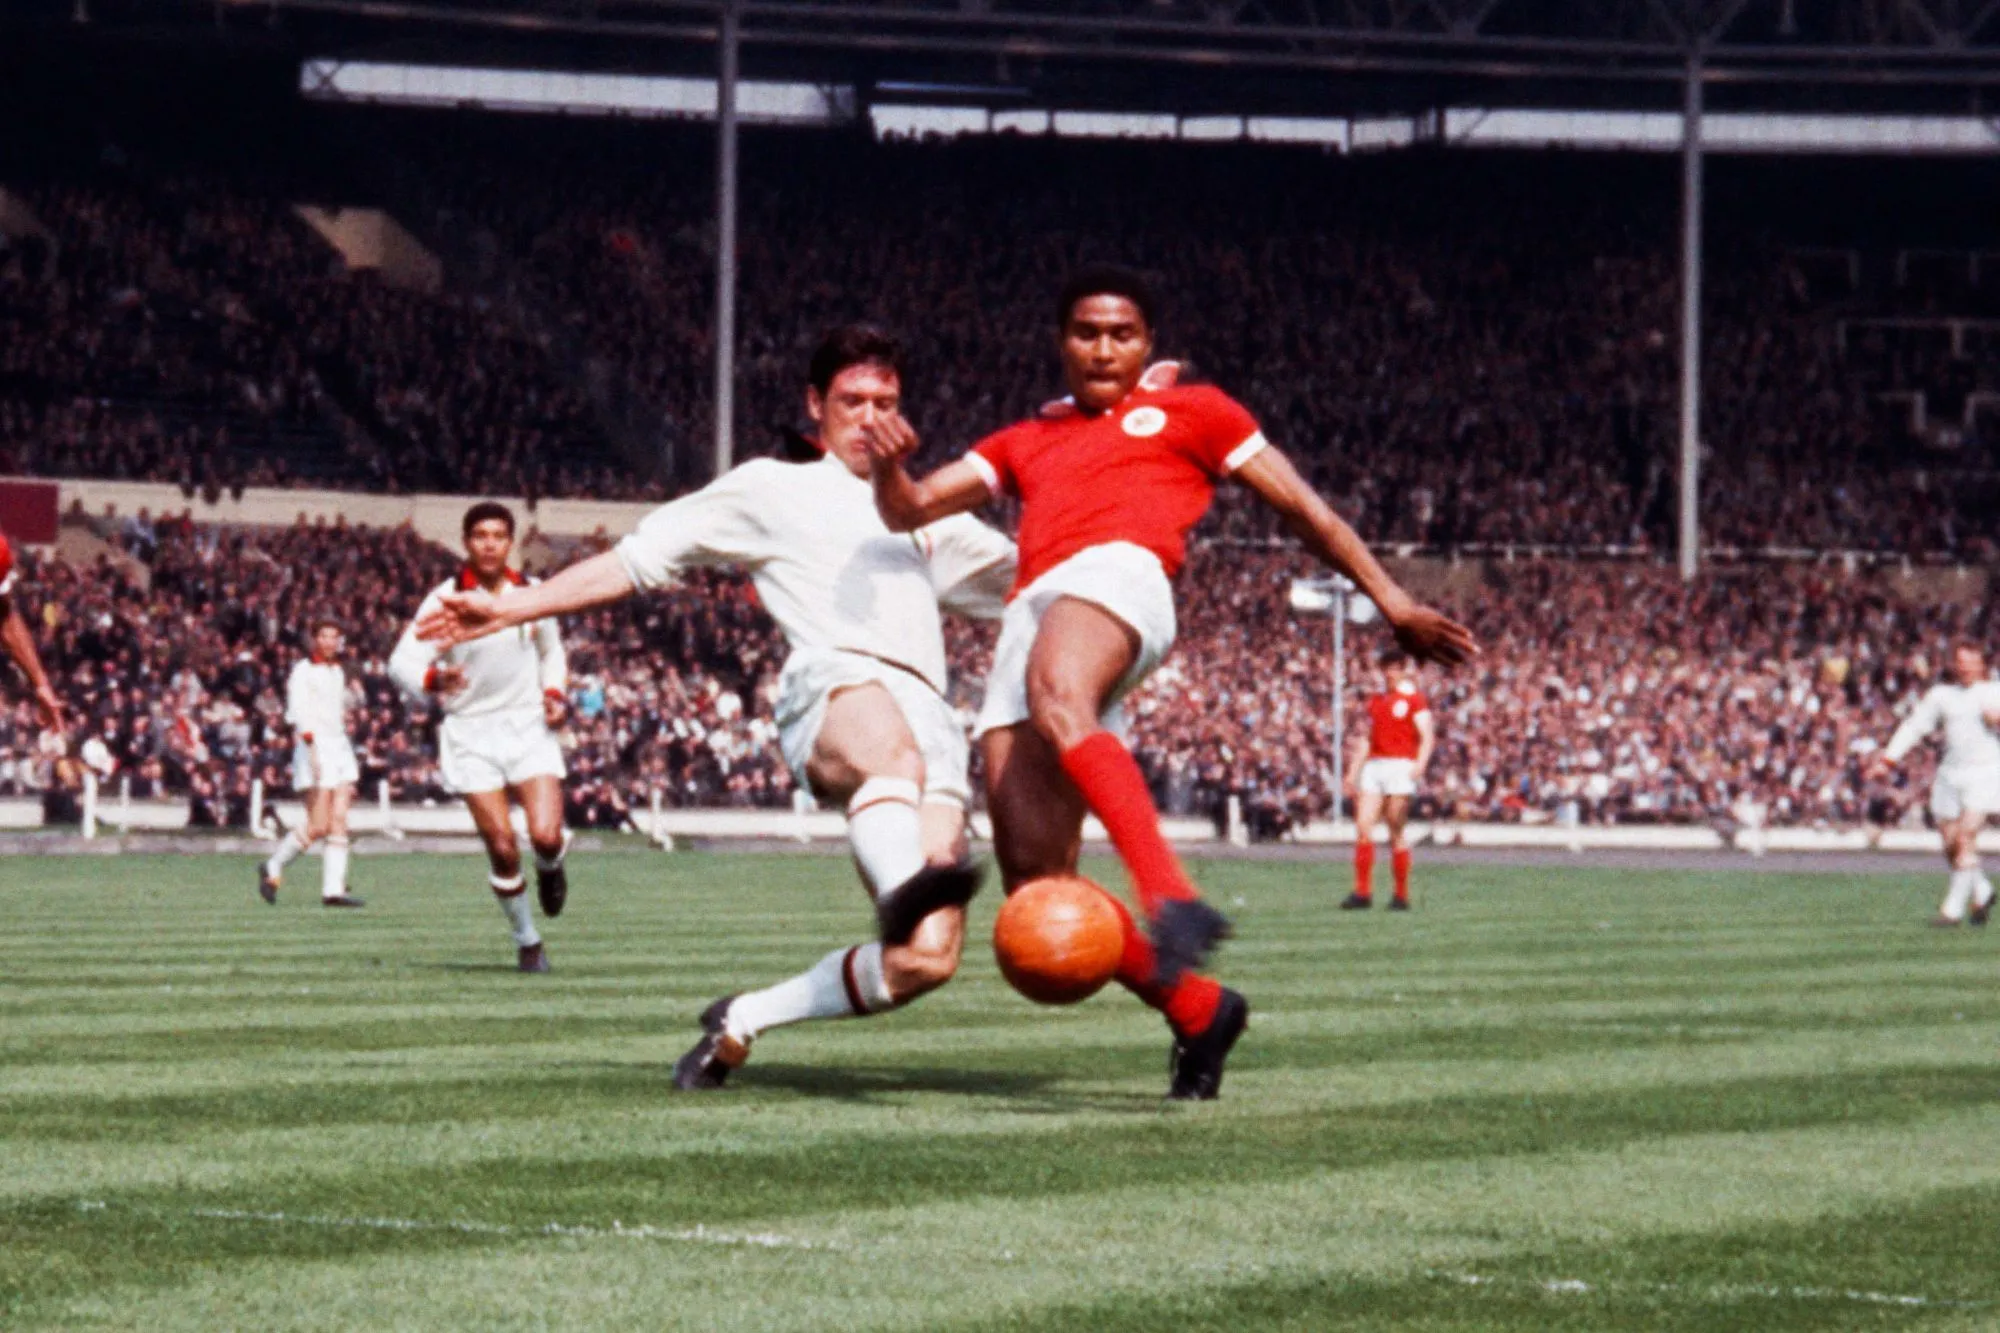 AC Milan's Cesare Maldini tackles Benfica's Eusebio during the European Cup Final match between Milan AC and Benfica on 22th May 1963